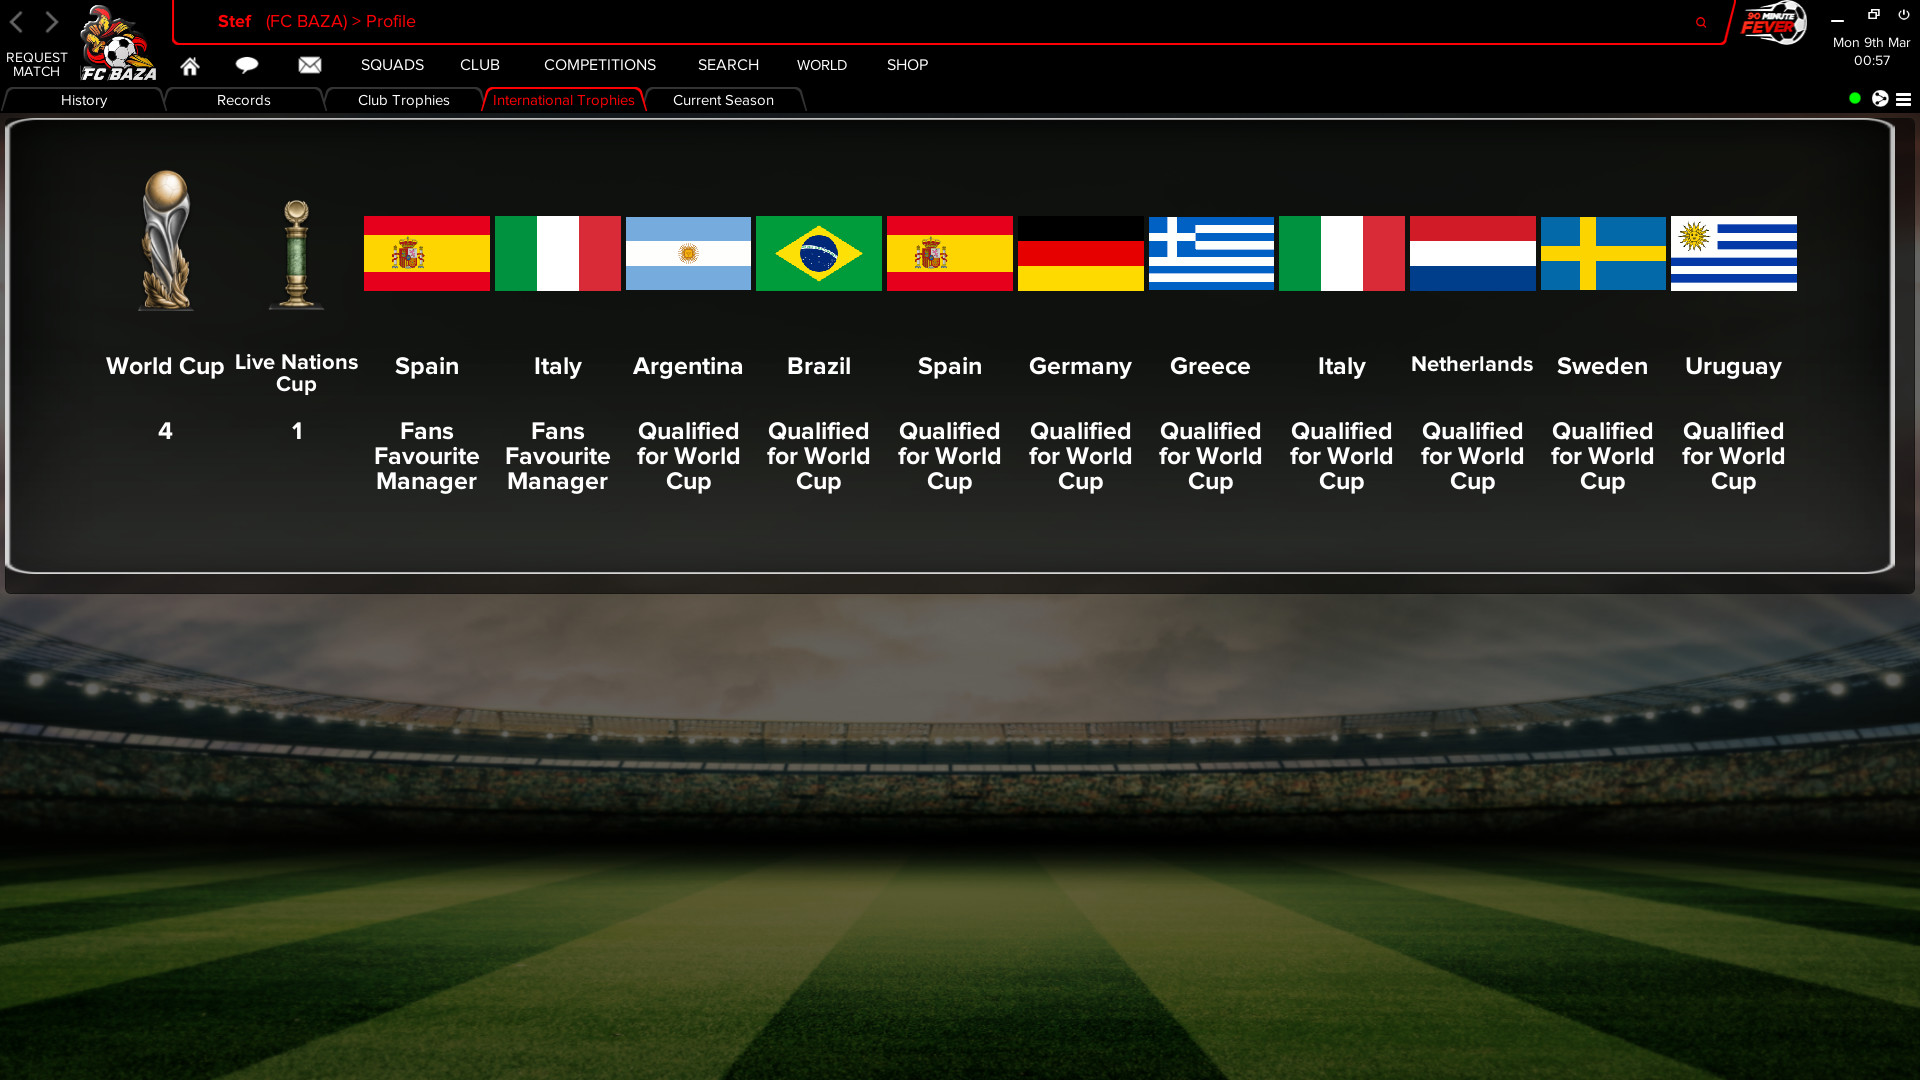 90 Minute Fever - Online Football (Soccer) Manager download the last version for android